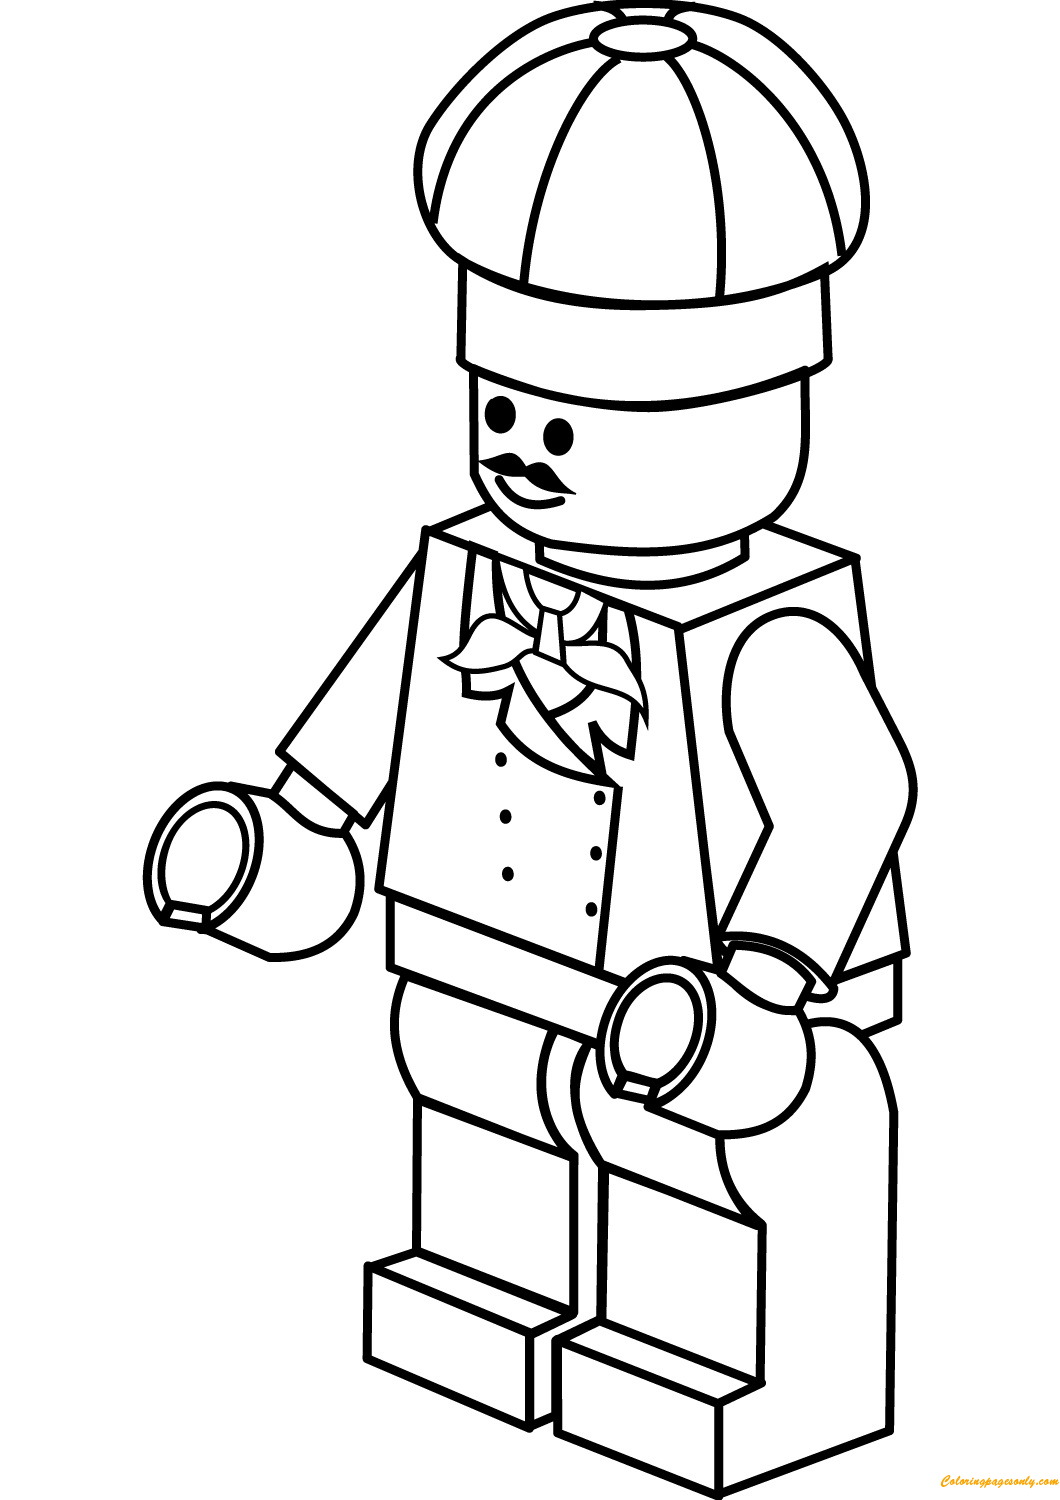 Lego City Chef Coloring Page Free Coloring Pages Online